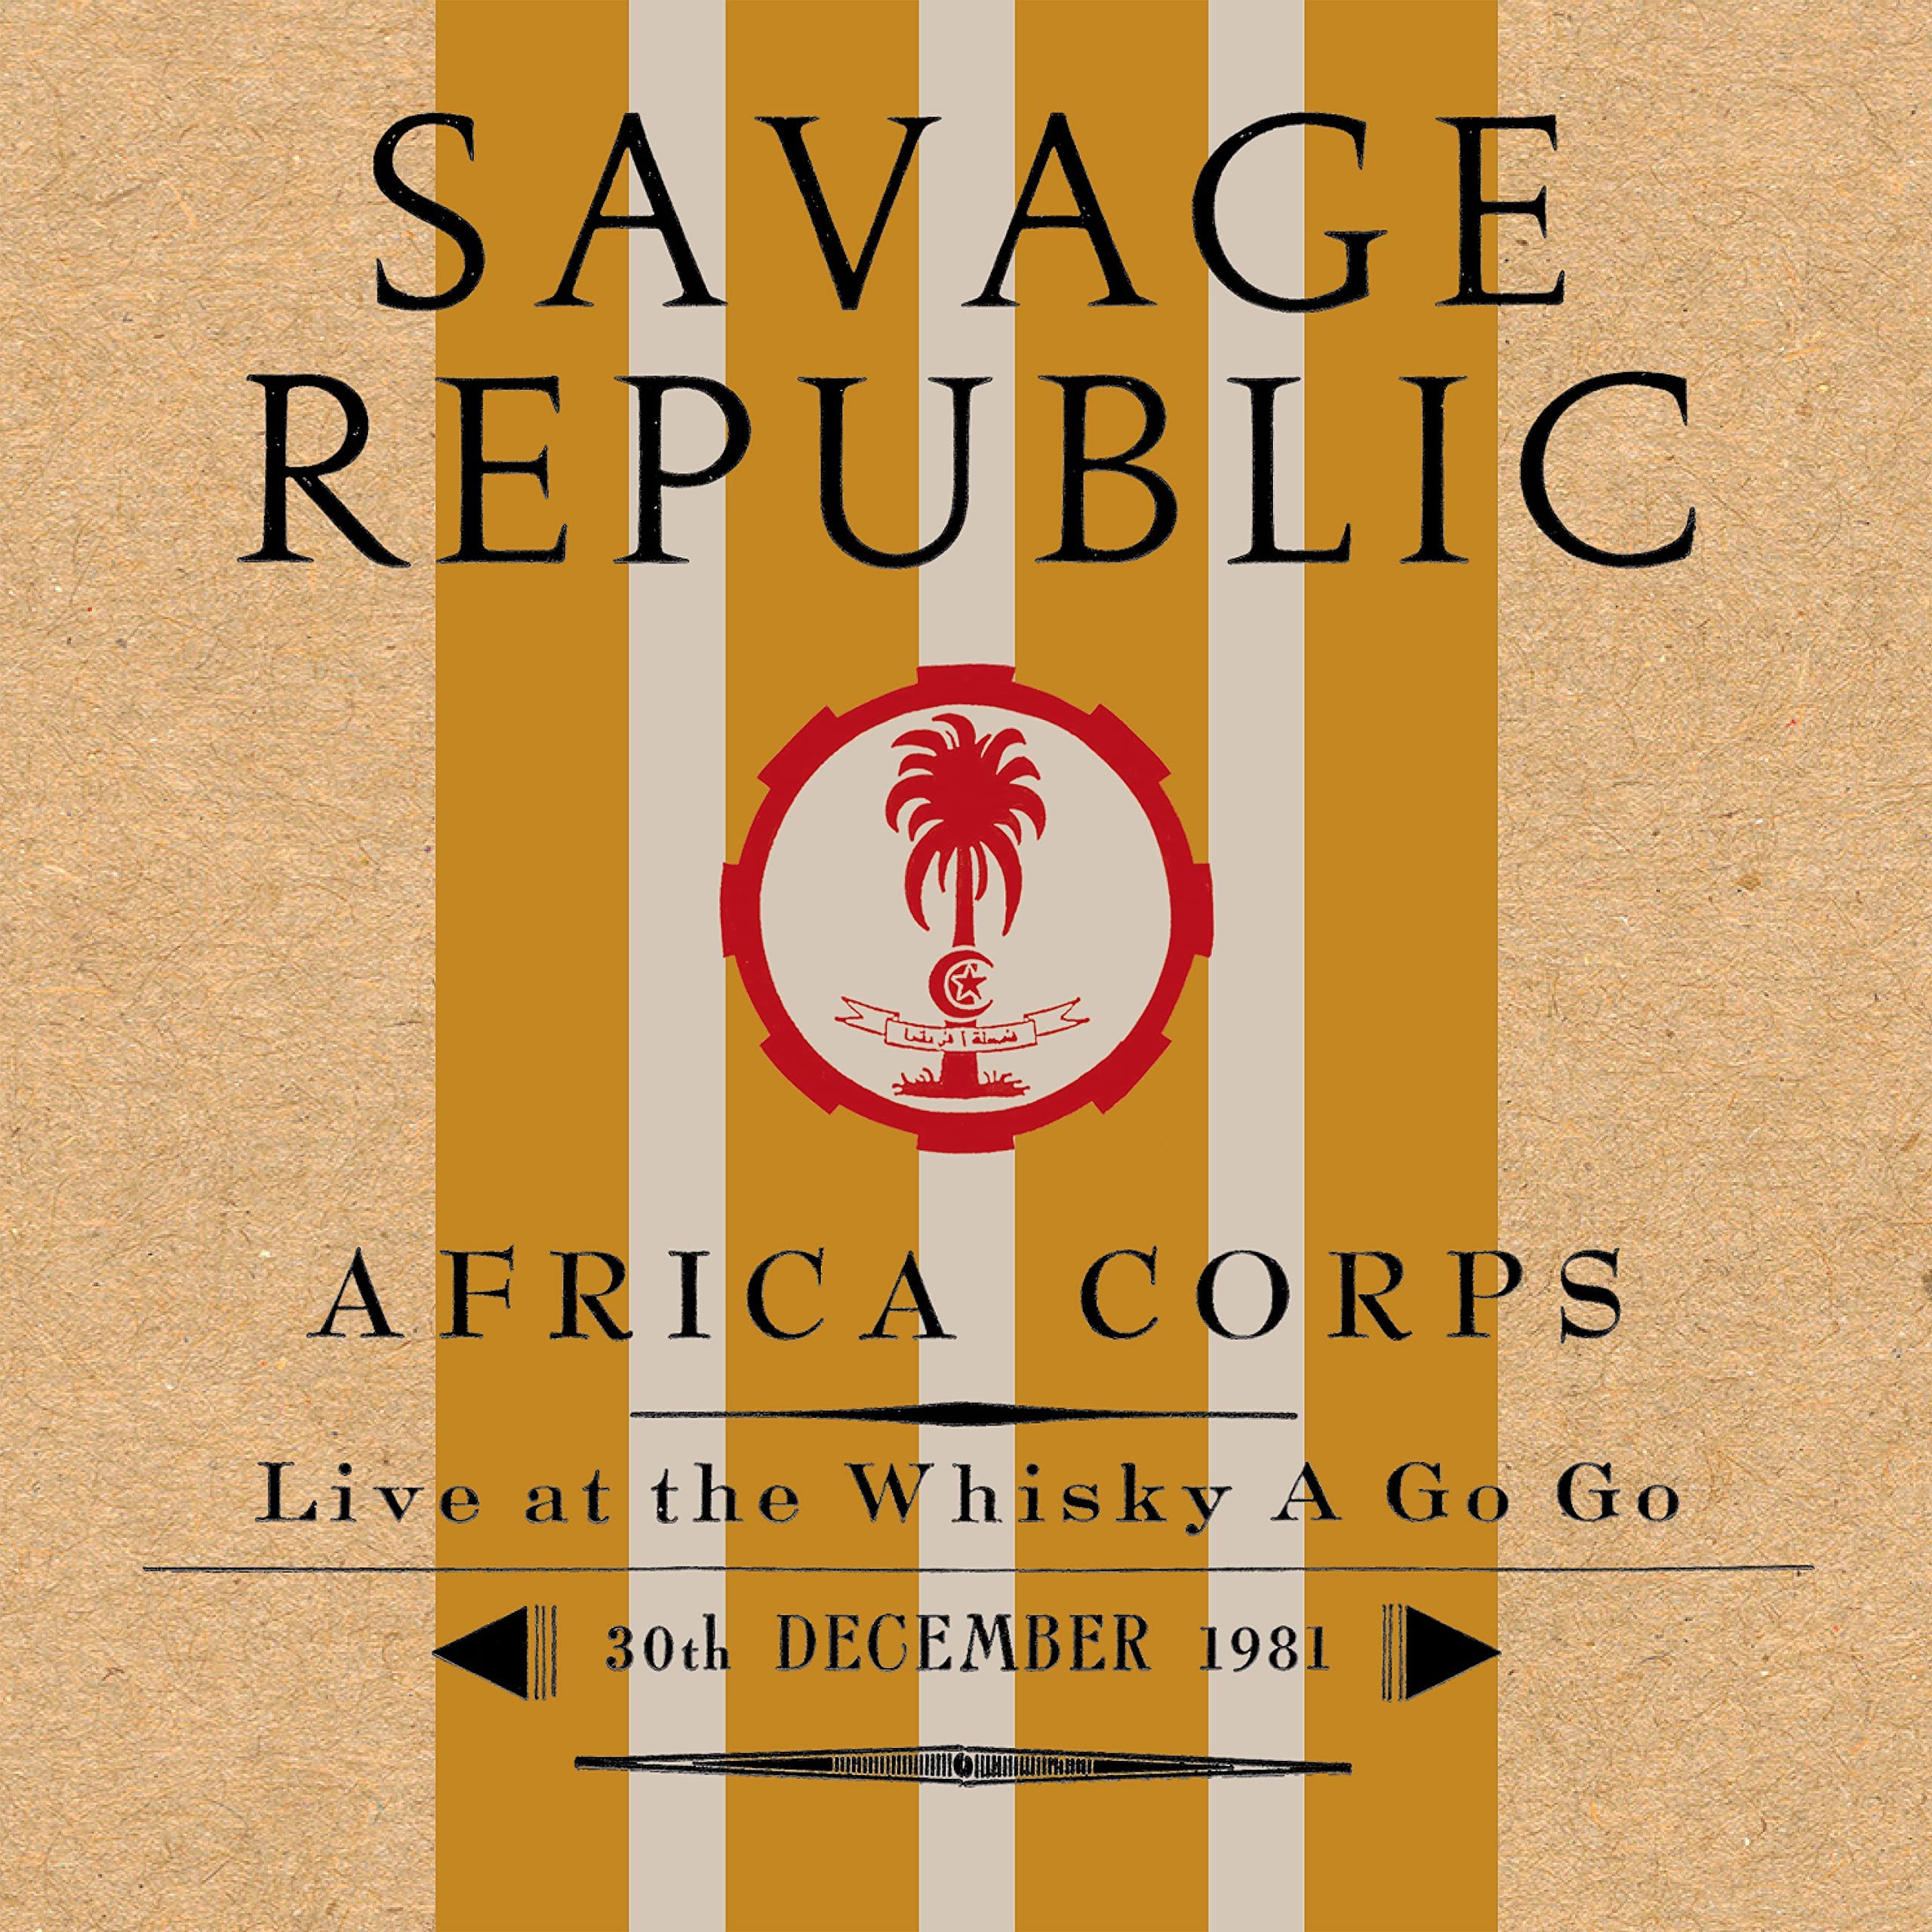 

Africa Corps: Live at the Whisky a Go Go, 30th December, 1981 [LP] - VINYL